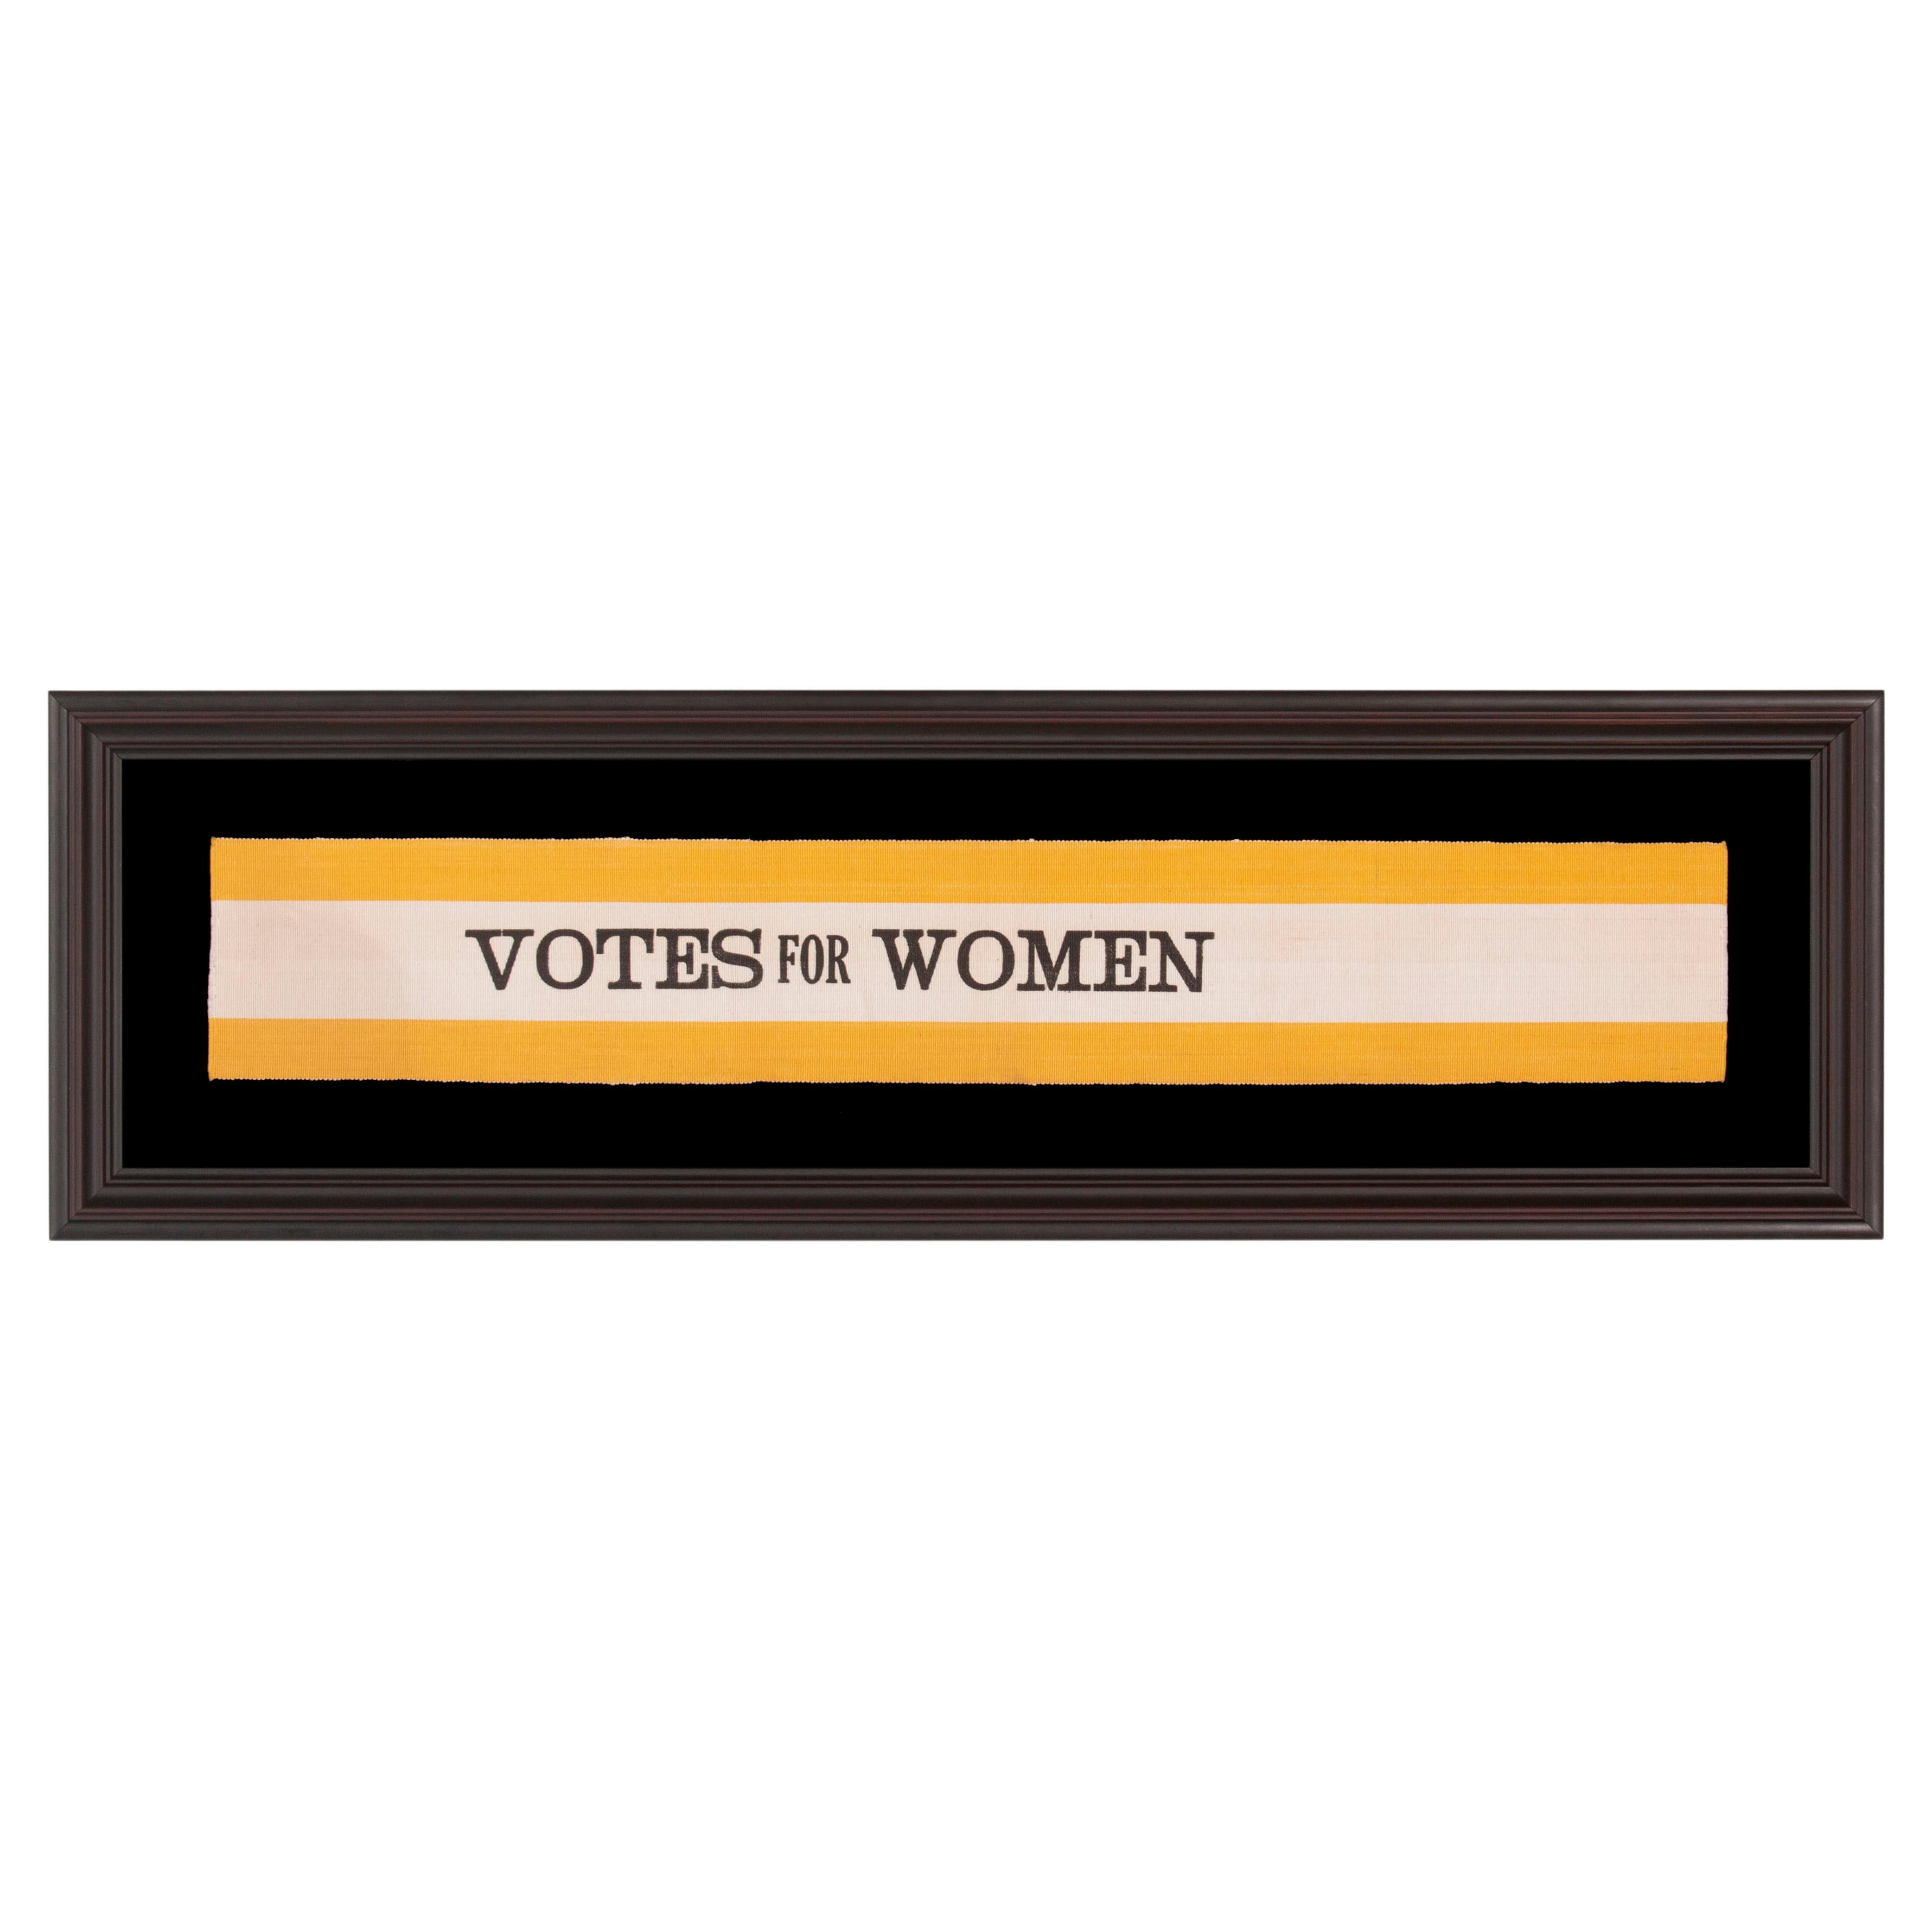 "Votes for Women" Sash in Yellow and White, ca 1910-1915